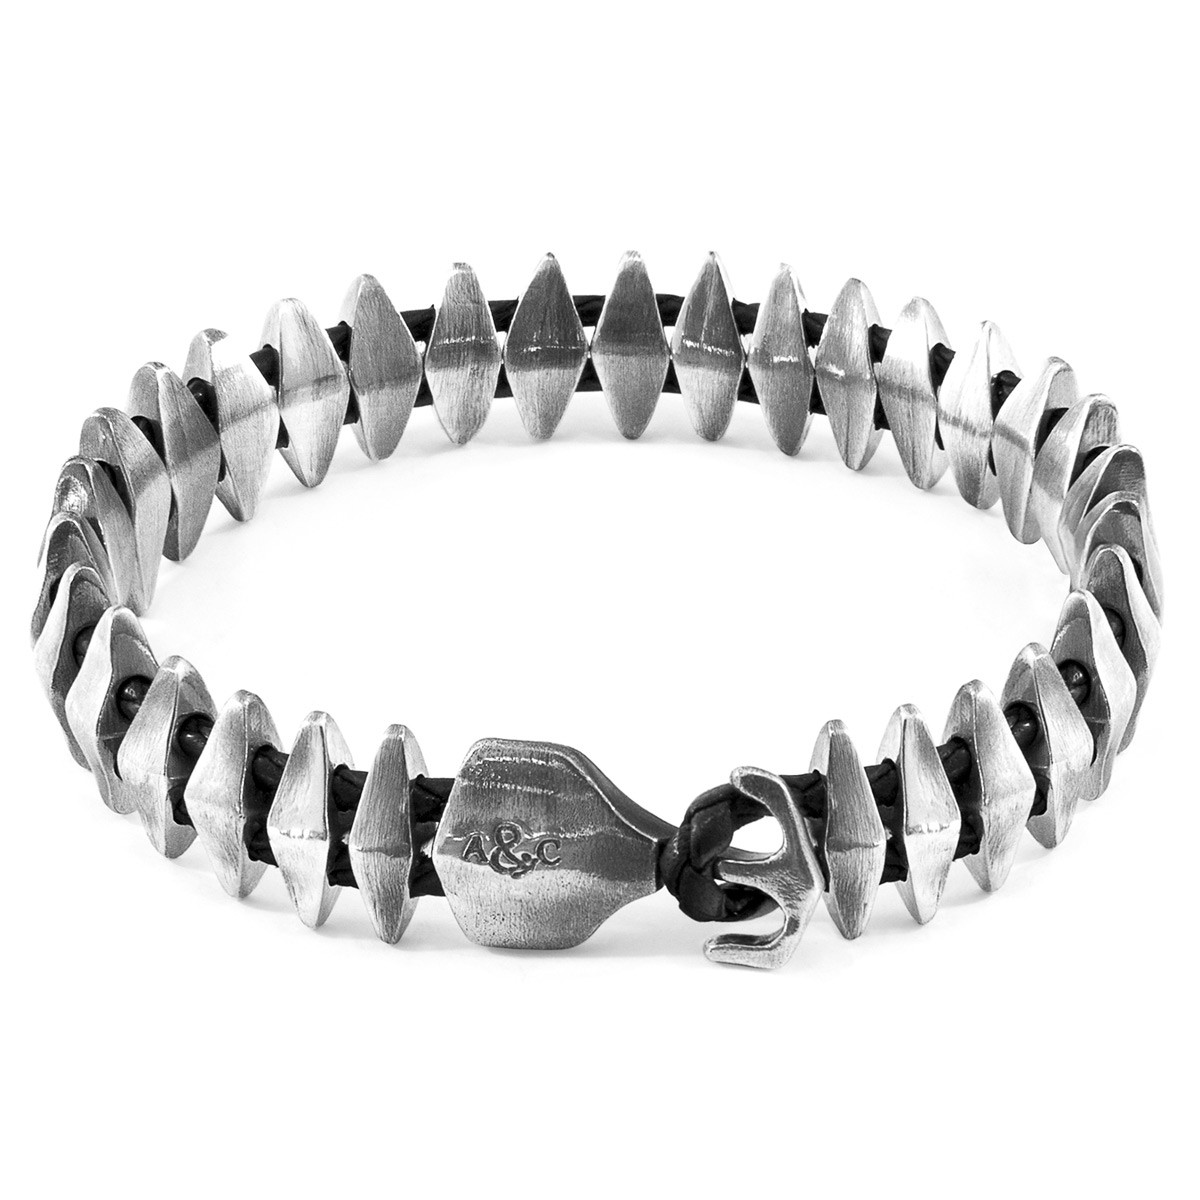 Anchor & Crew Coal Black Delta Maxi Silver and Braided Leather Bracelet